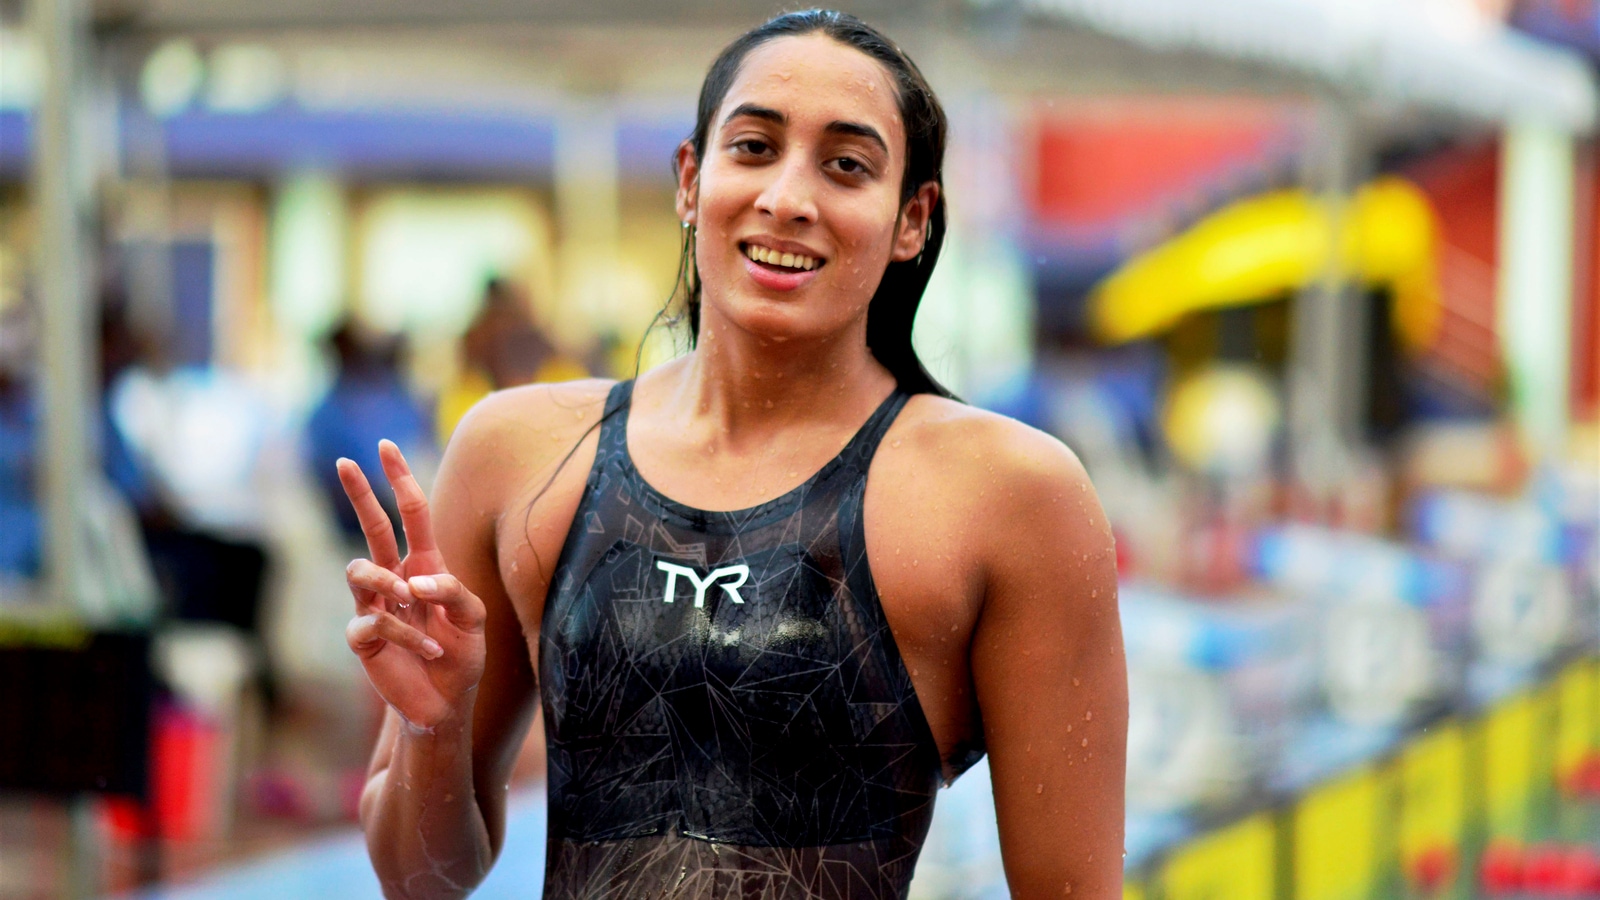 out-of-the-sinkhole-maana-patel-finds-joy-and-wins-in-the-pool-again